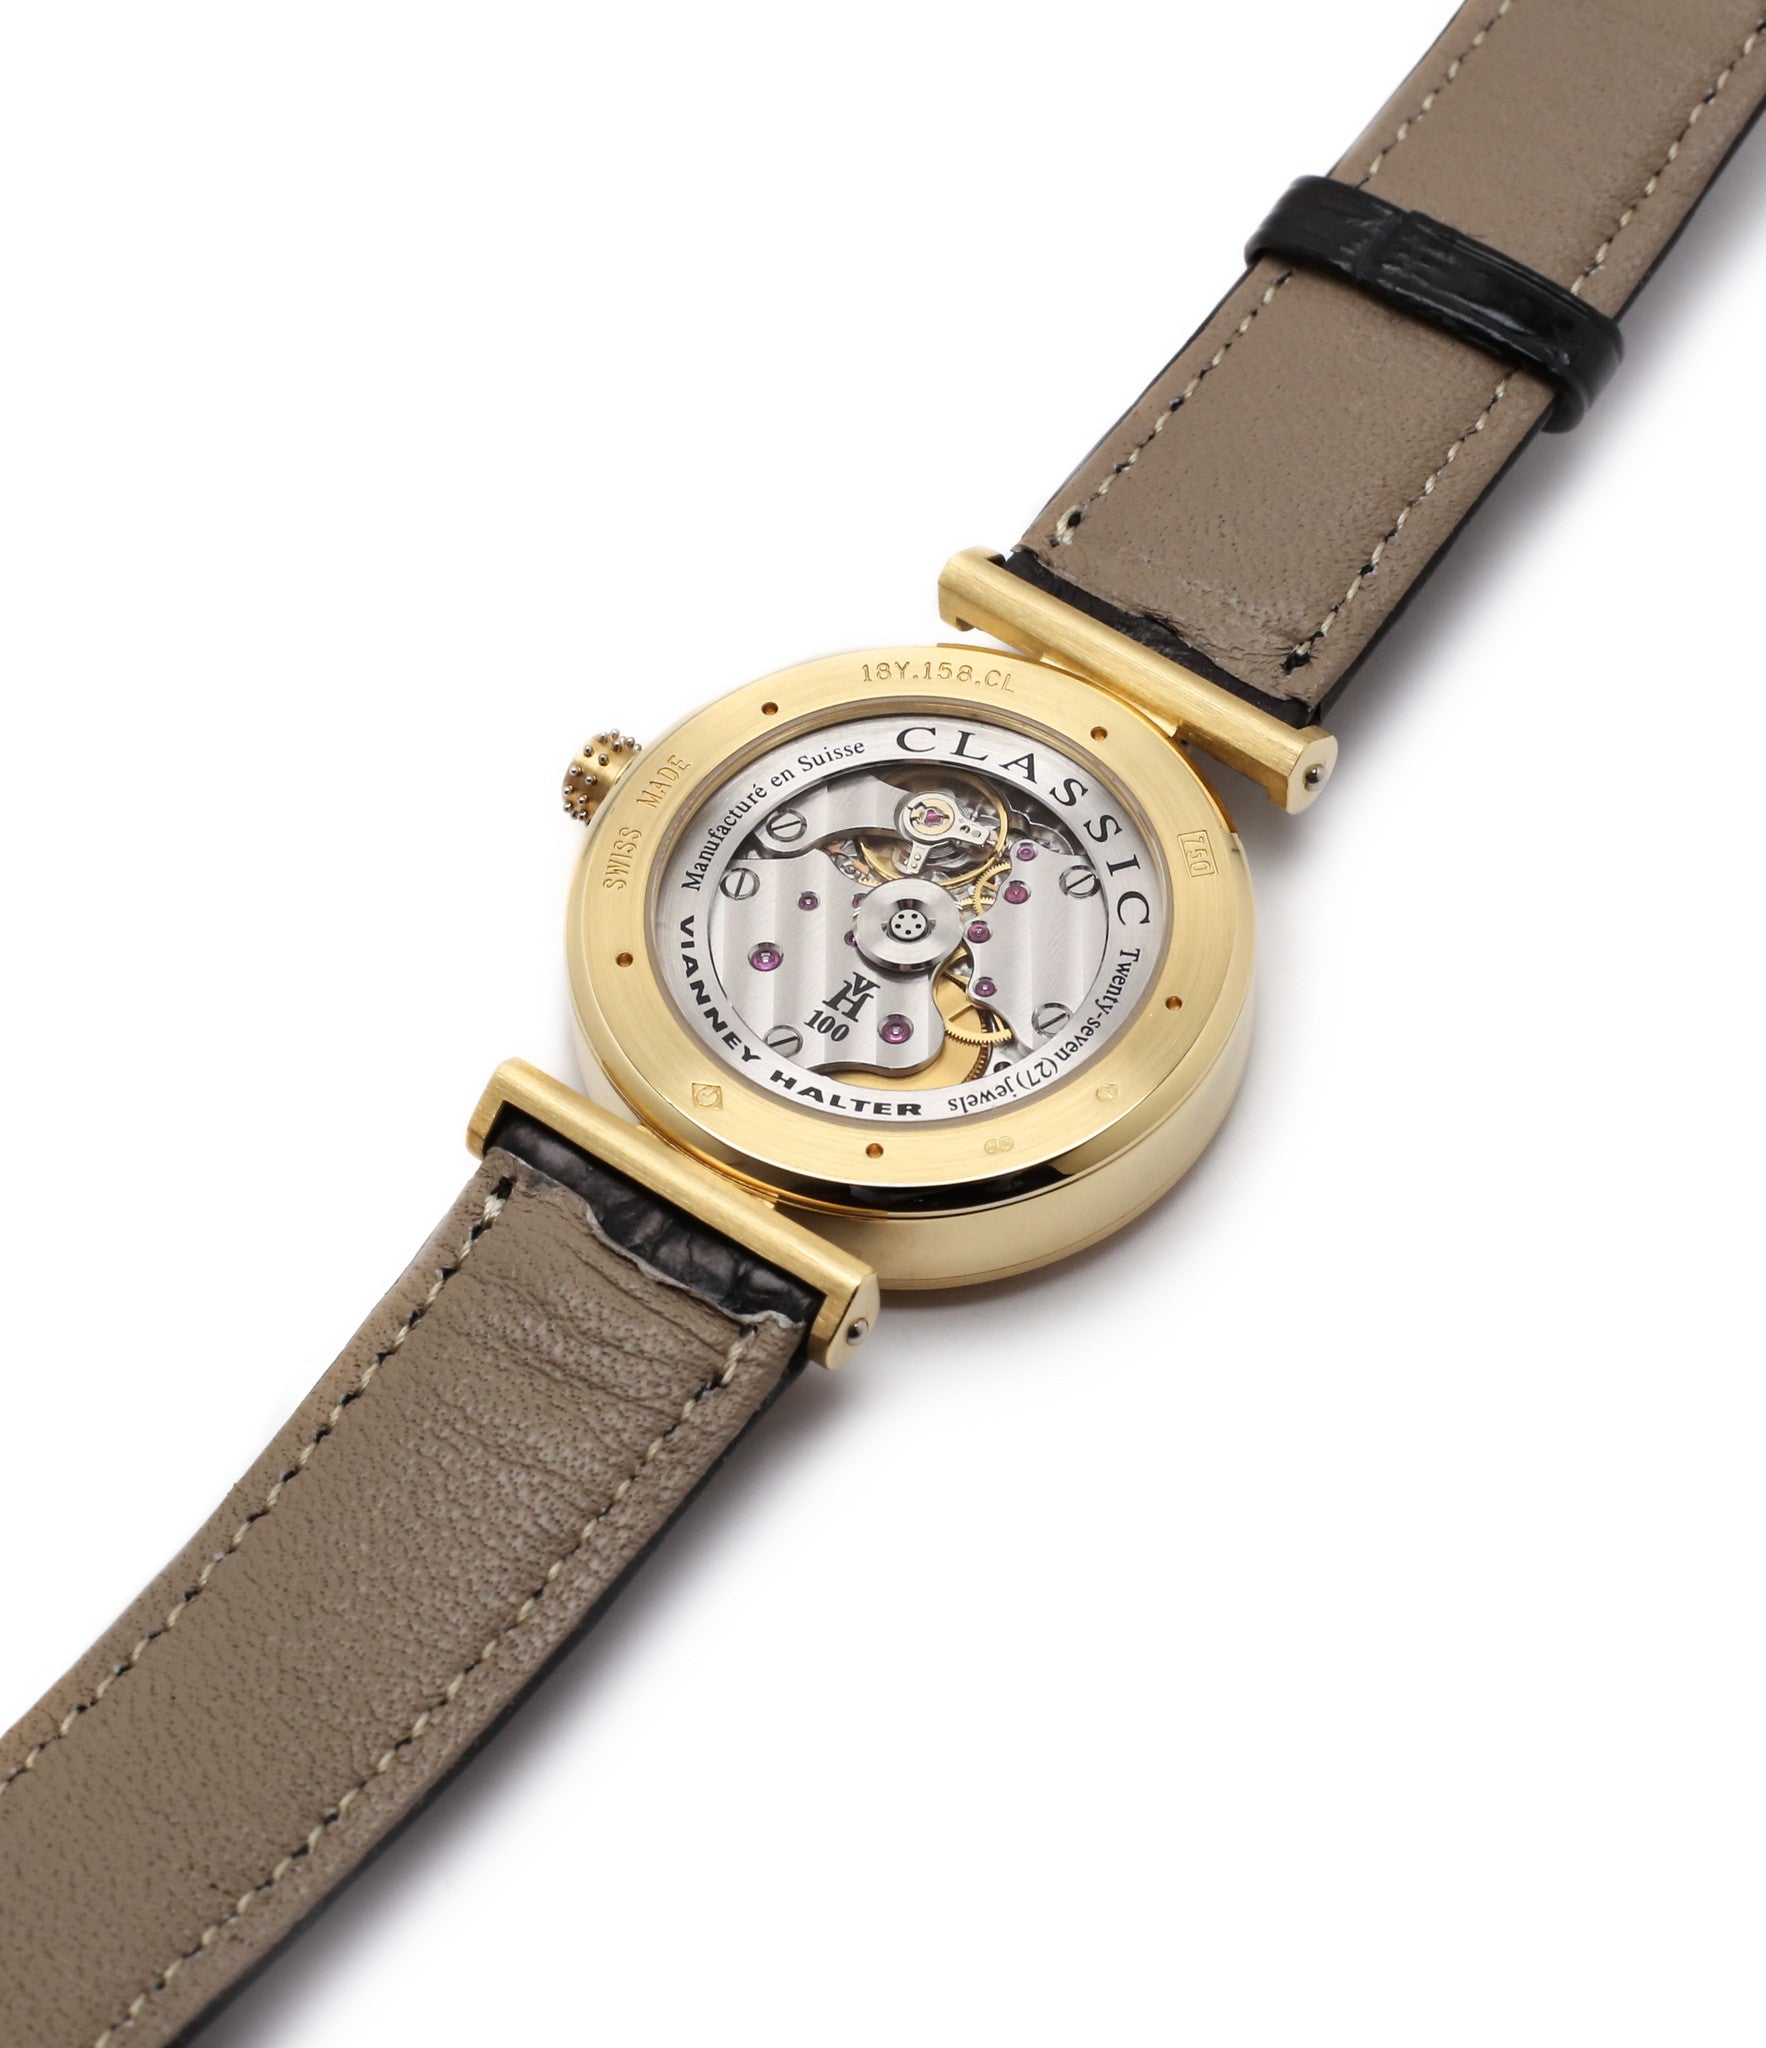 display back movement buy Vianney Halter Classic yellow gold time-only dress watch at A Collected Man the approve seller of independent watchmakers